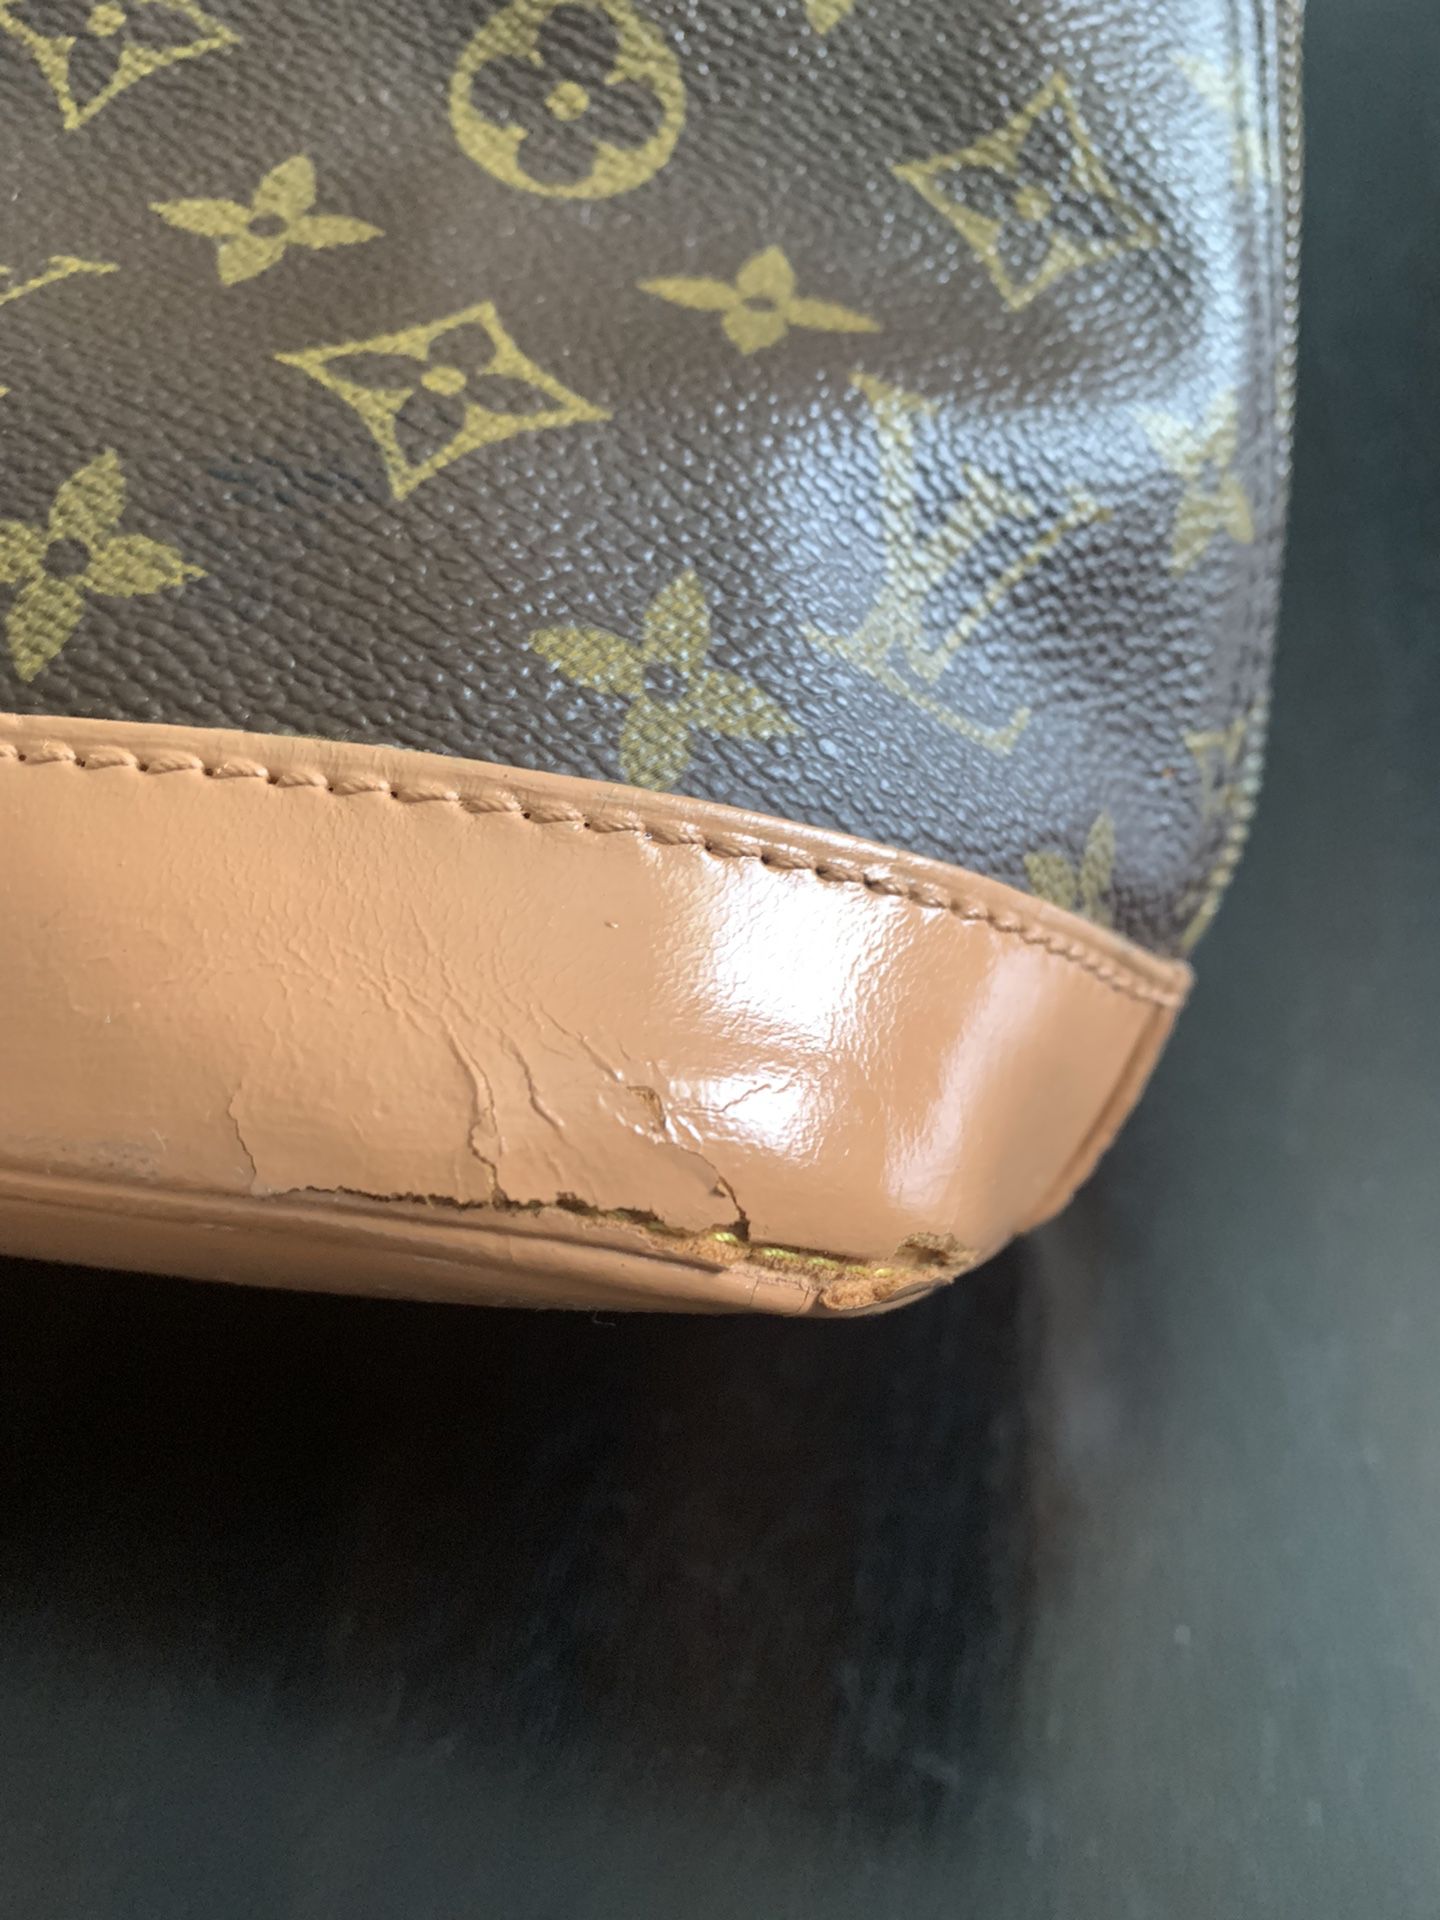 Authentic Louis Vuitton Alma Pm Bag for Sale in Los Angeles, CA